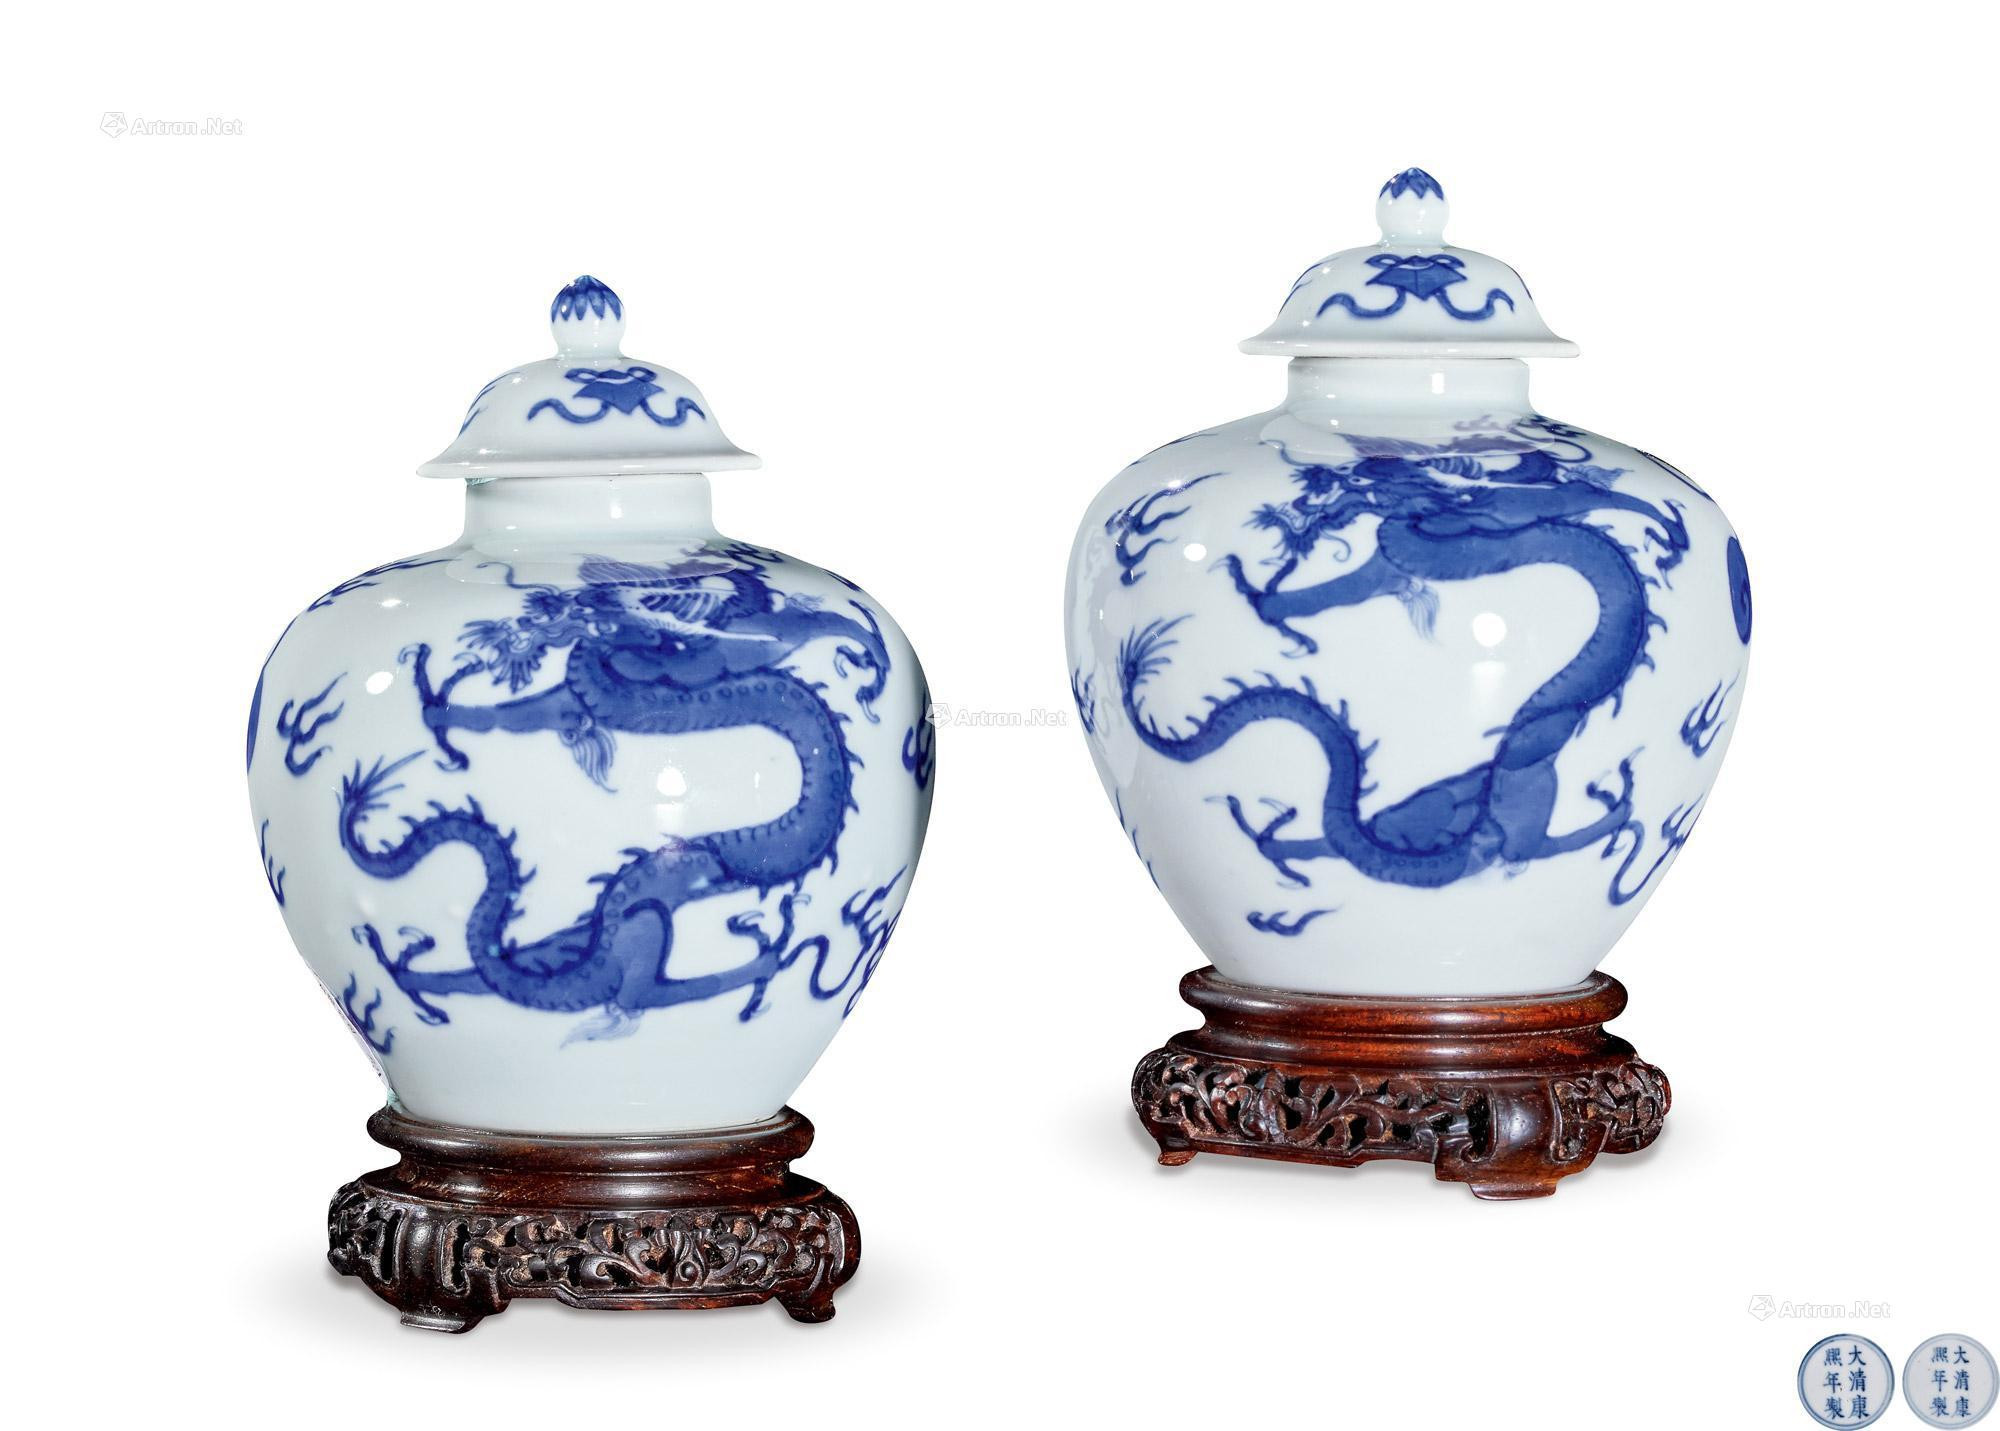 A FINE AND RARE PAIR OF BLUE AND WHITE‘DRAGON’JARLETS AND COVERS